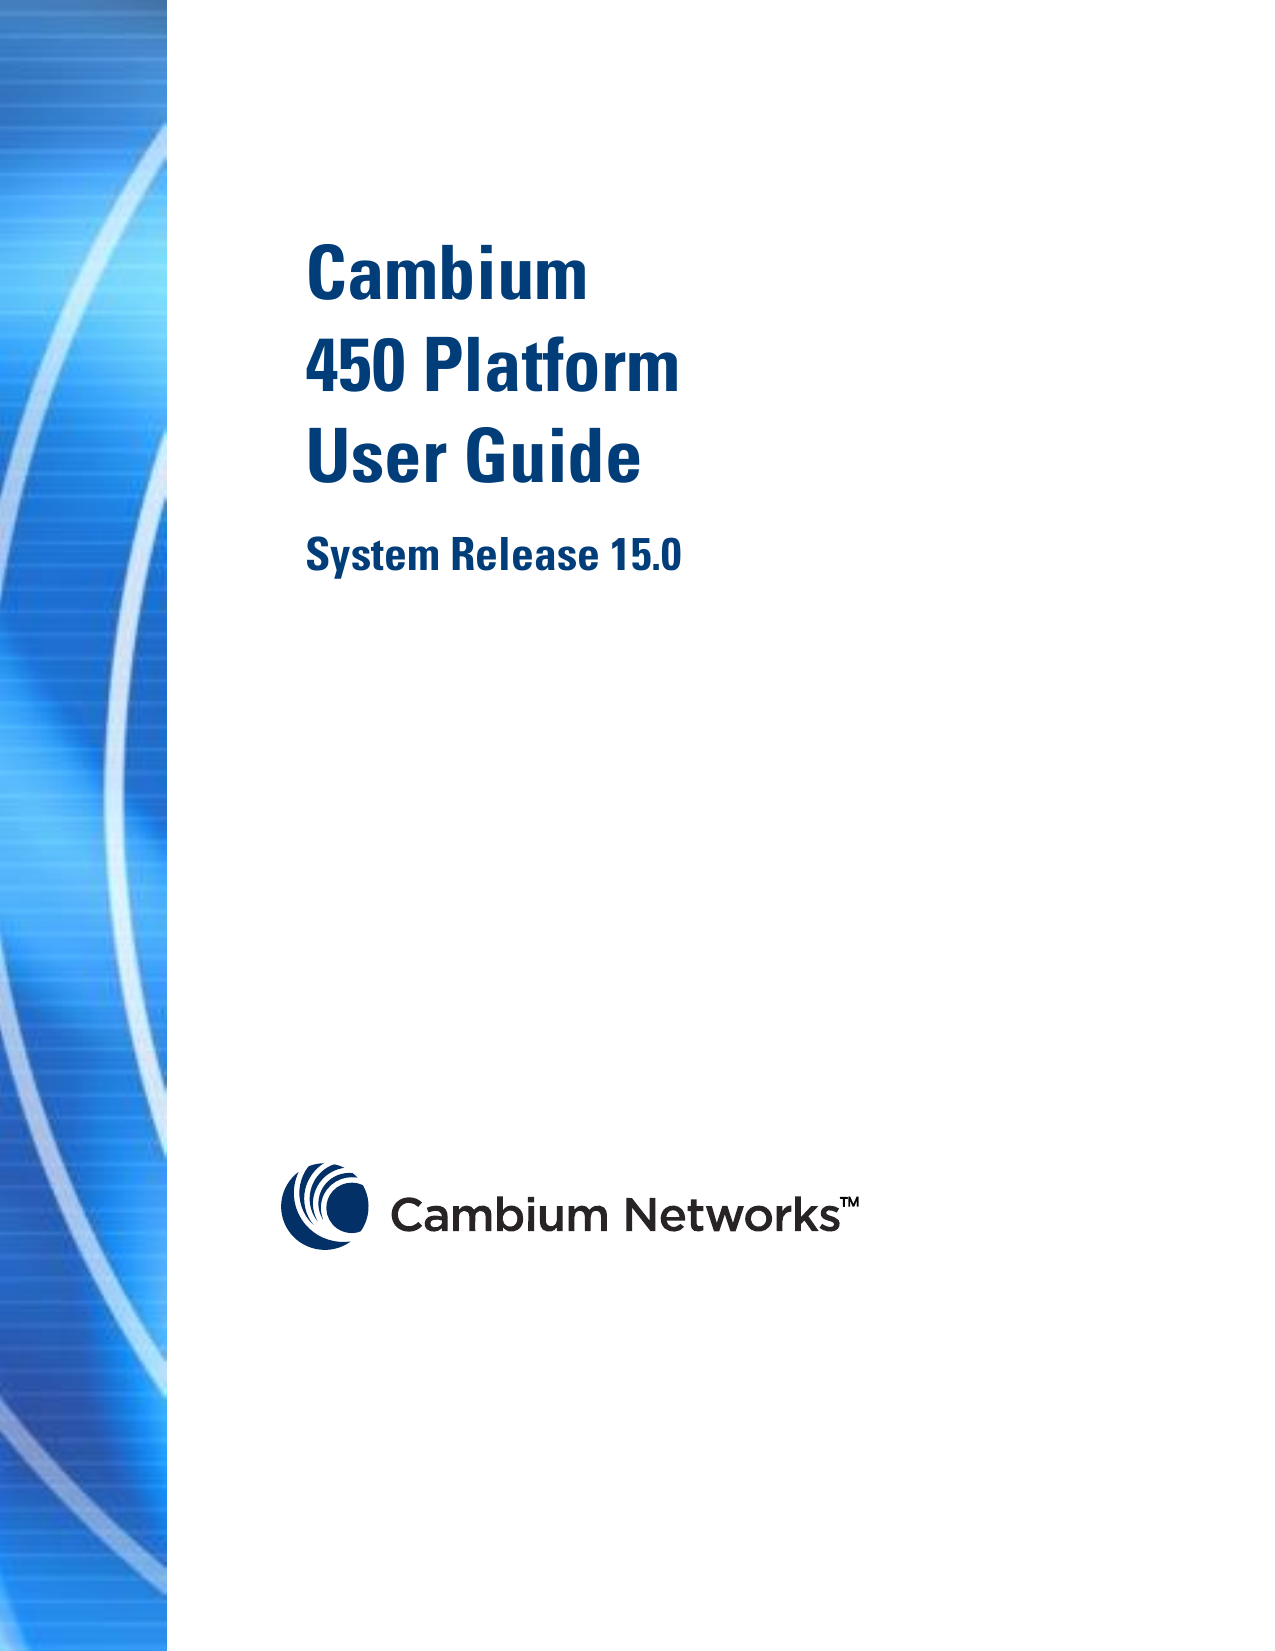 33F Cambium  450 Platform User Guide System Release 15.0 pass 